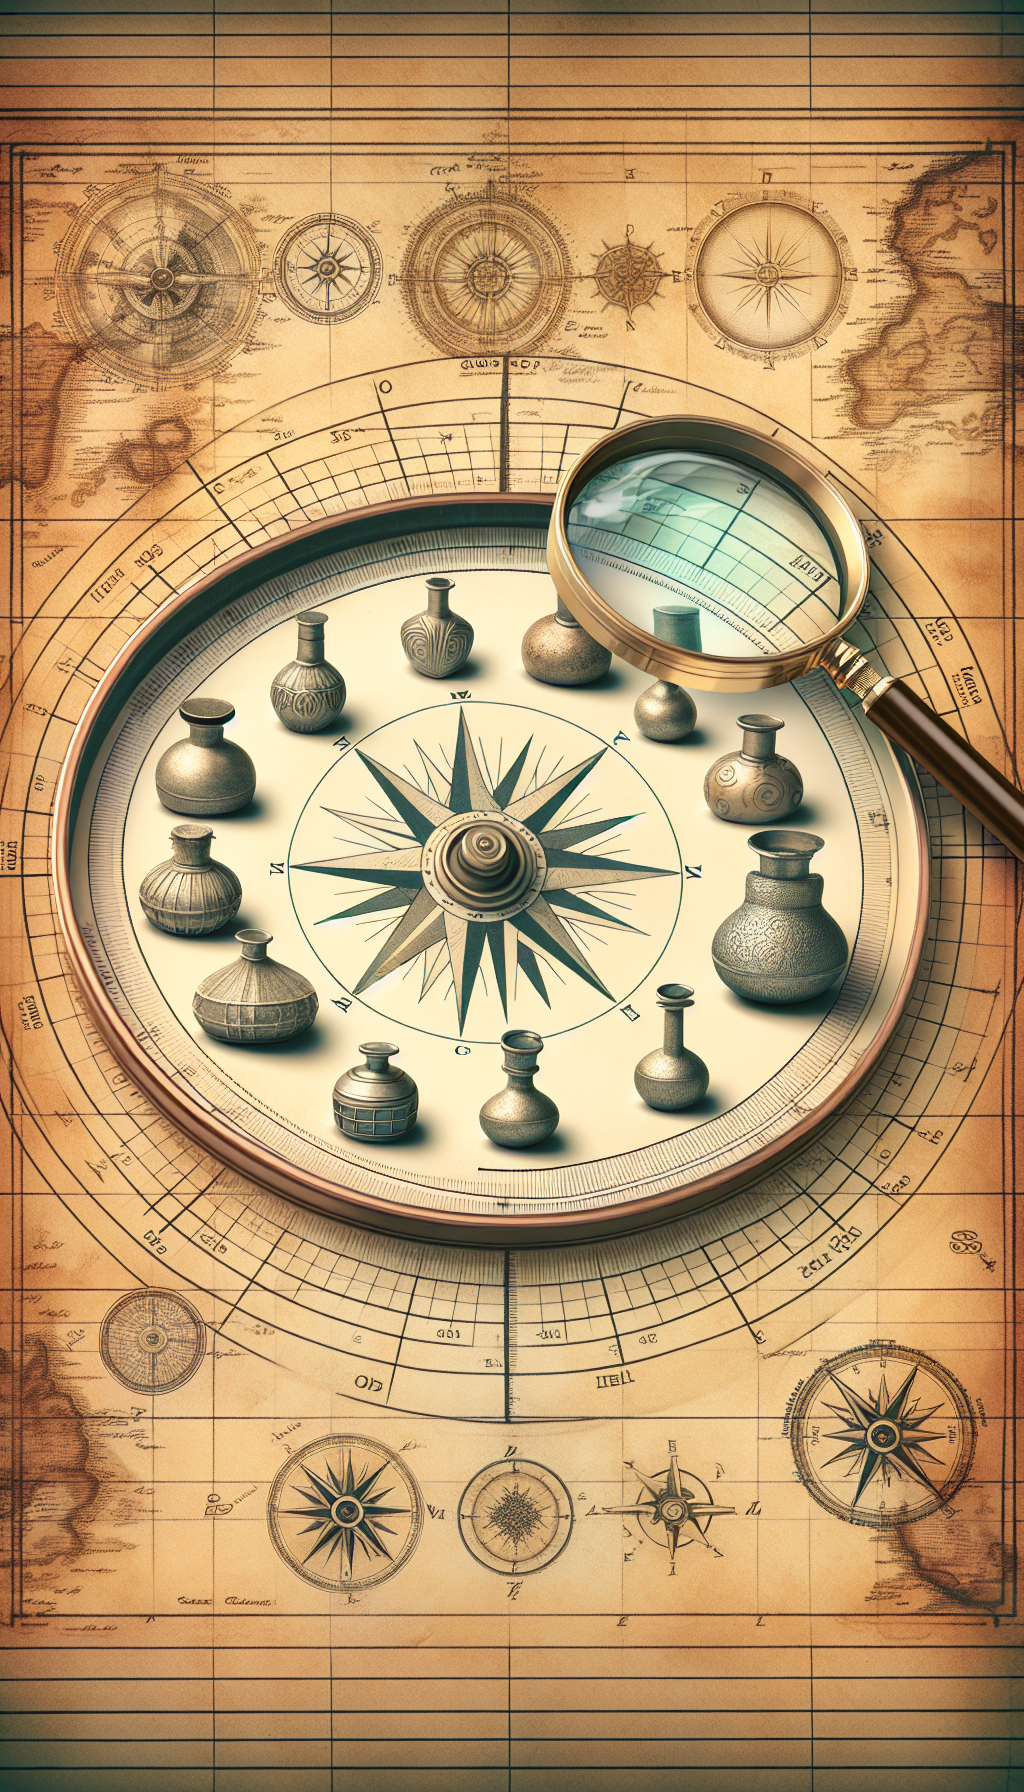 An antique-styled compass needle pivots across a parchment map background, pointing to various finely-detailed powder flasks representing different eras and origins, with magnifying glasses hovering over key features to symbolize identification, while a subtle watermark of a timeline intertwines with the map's longitude lines, guiding the eye to the pivotal aspects that determine each flask's provenance and age.